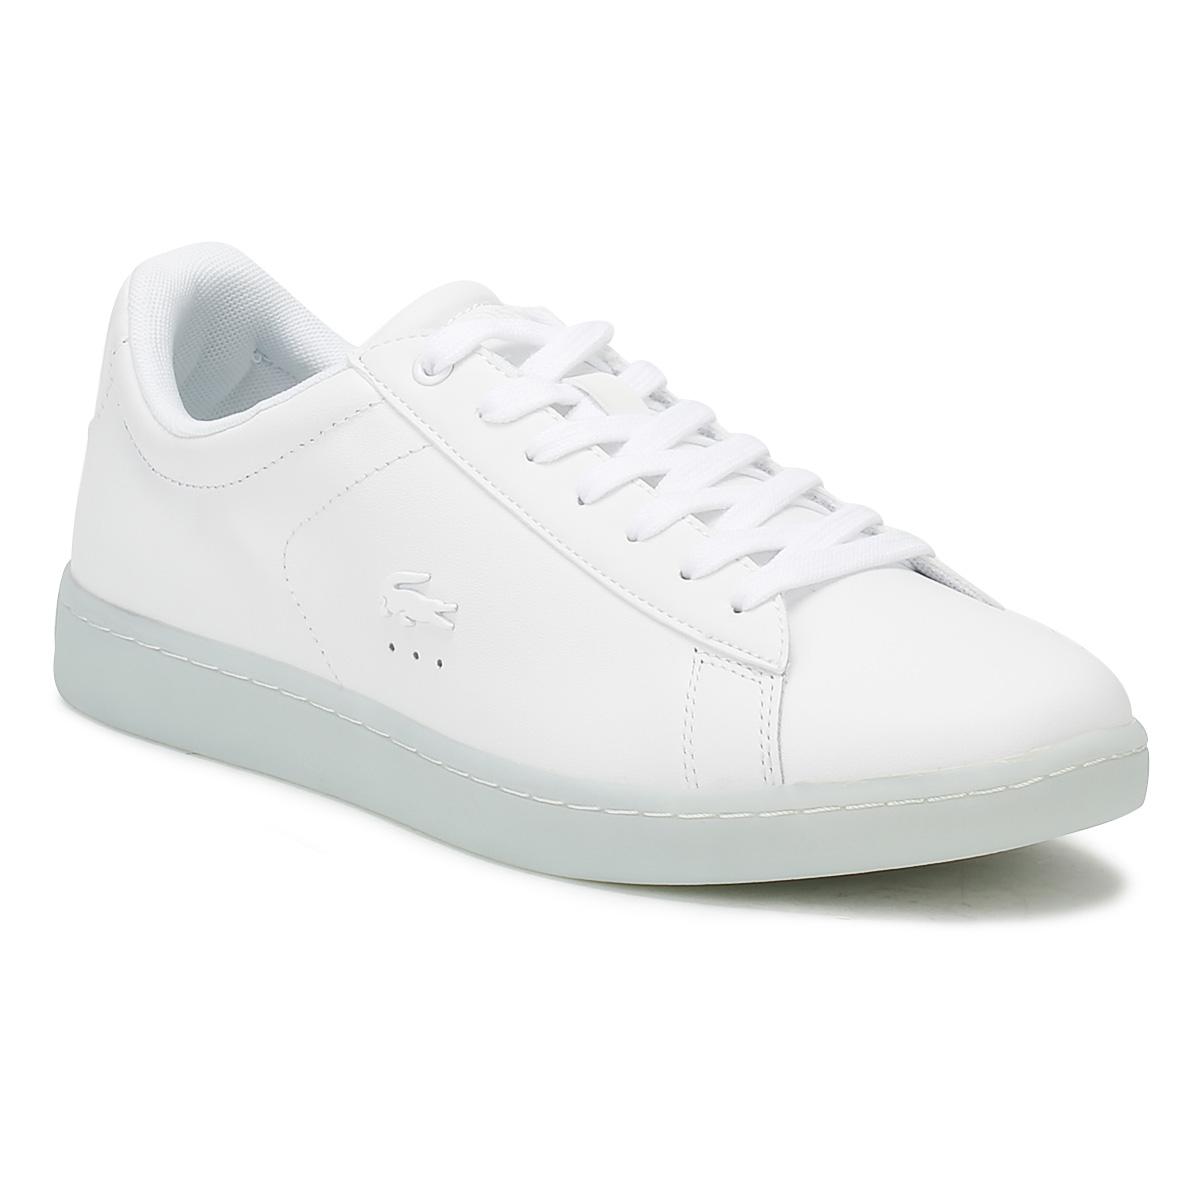 Lacoste Leather Carnaby Evo 118 3 in 